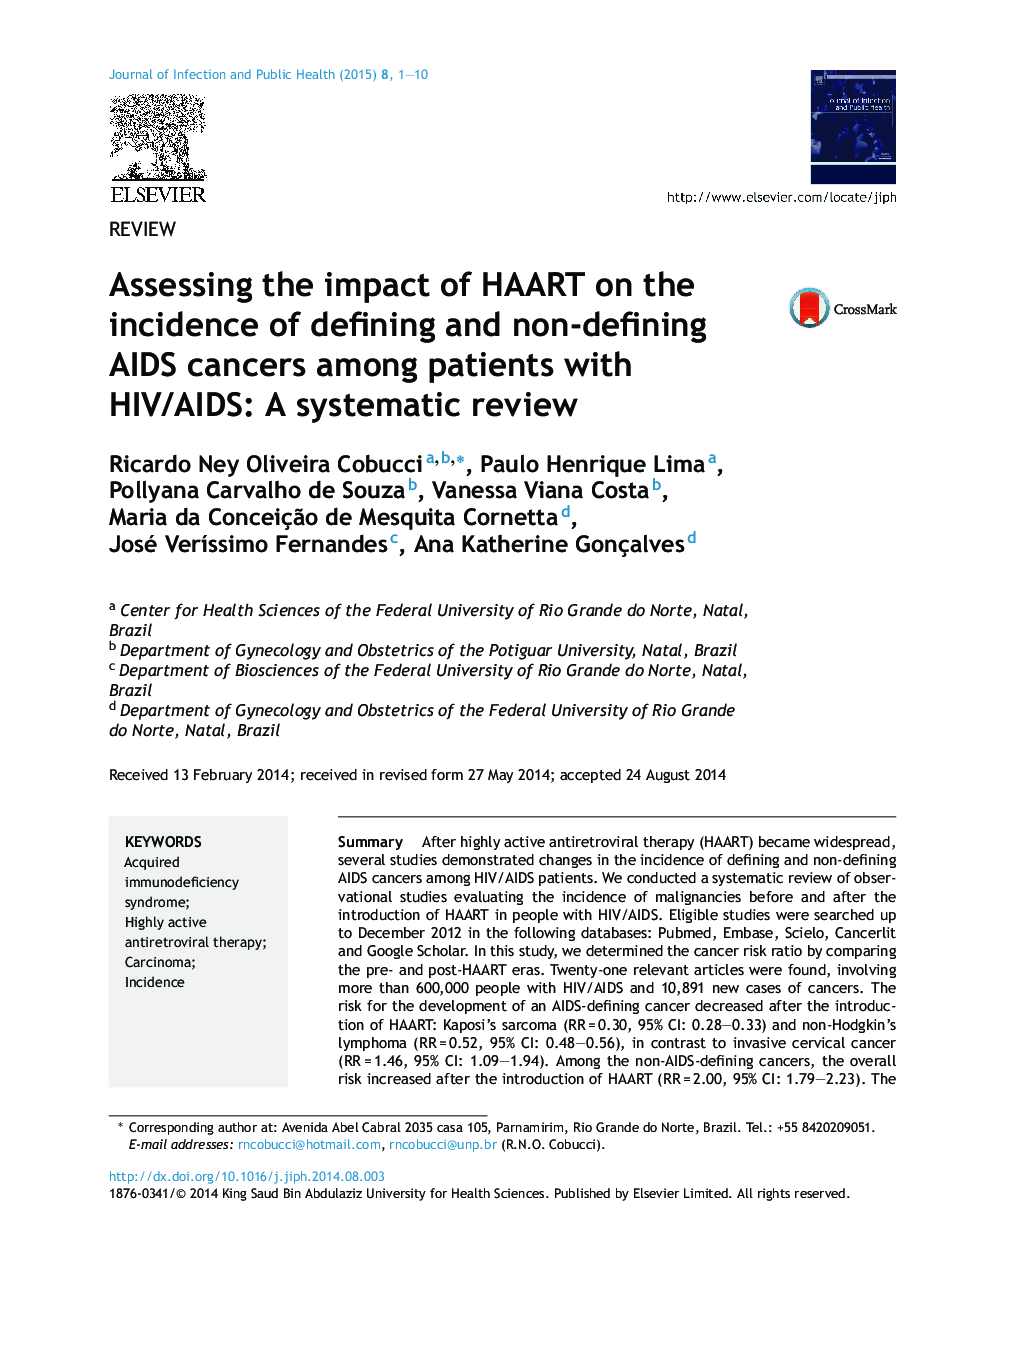 Assessing the impact of HAART on the incidence of defining and non-defining AIDS cancers among patients with HIV/AIDS: A systematic review